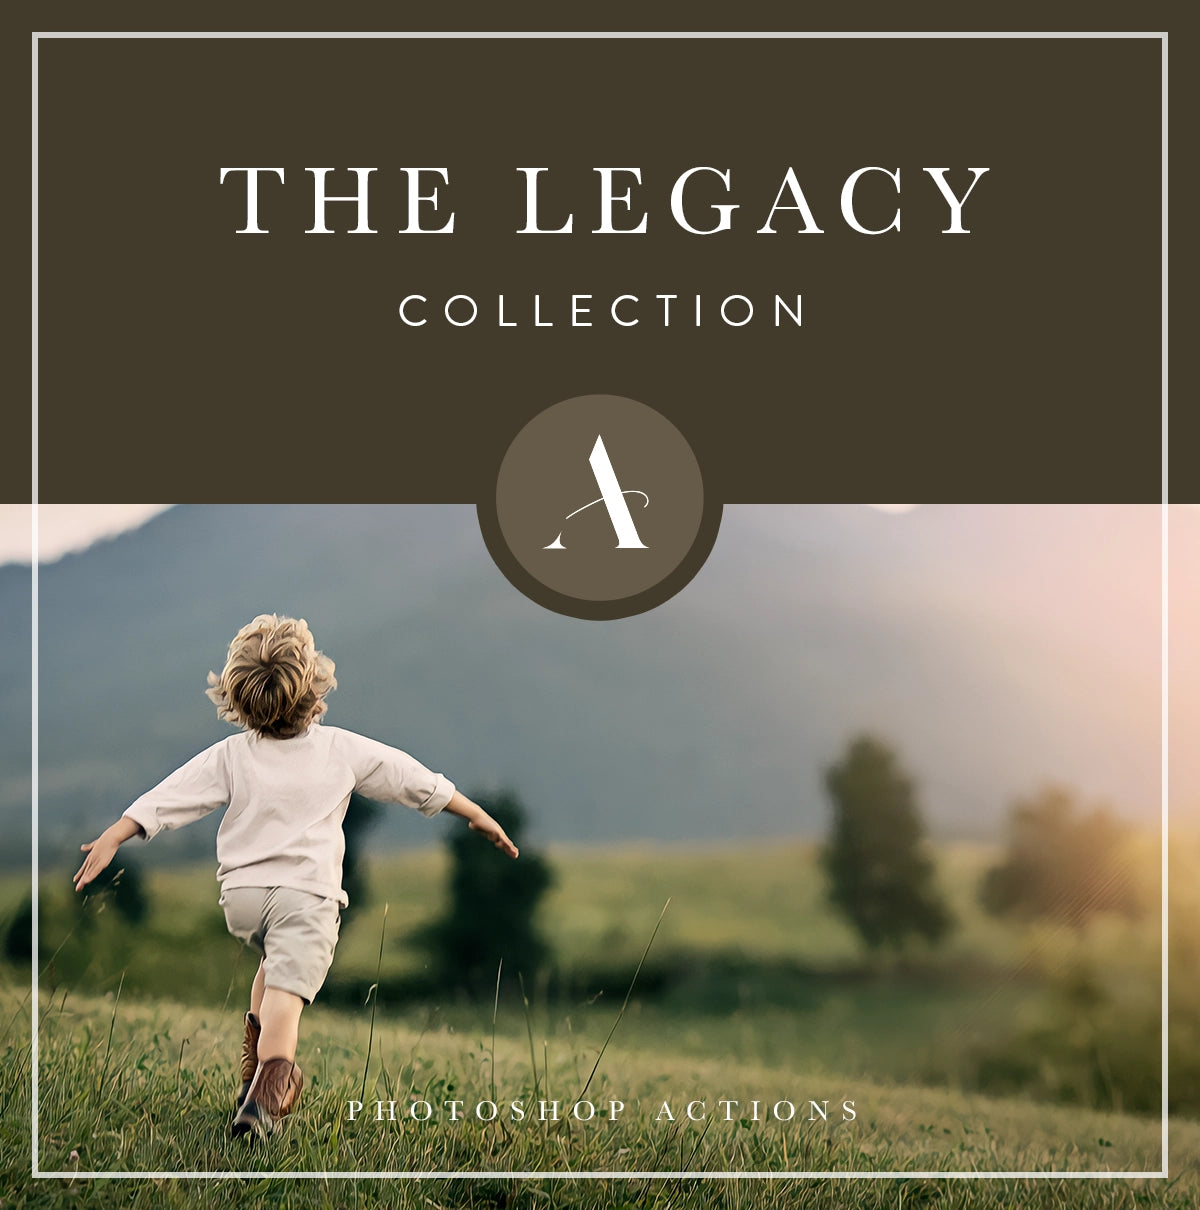 The Legacy Photoshop Actions